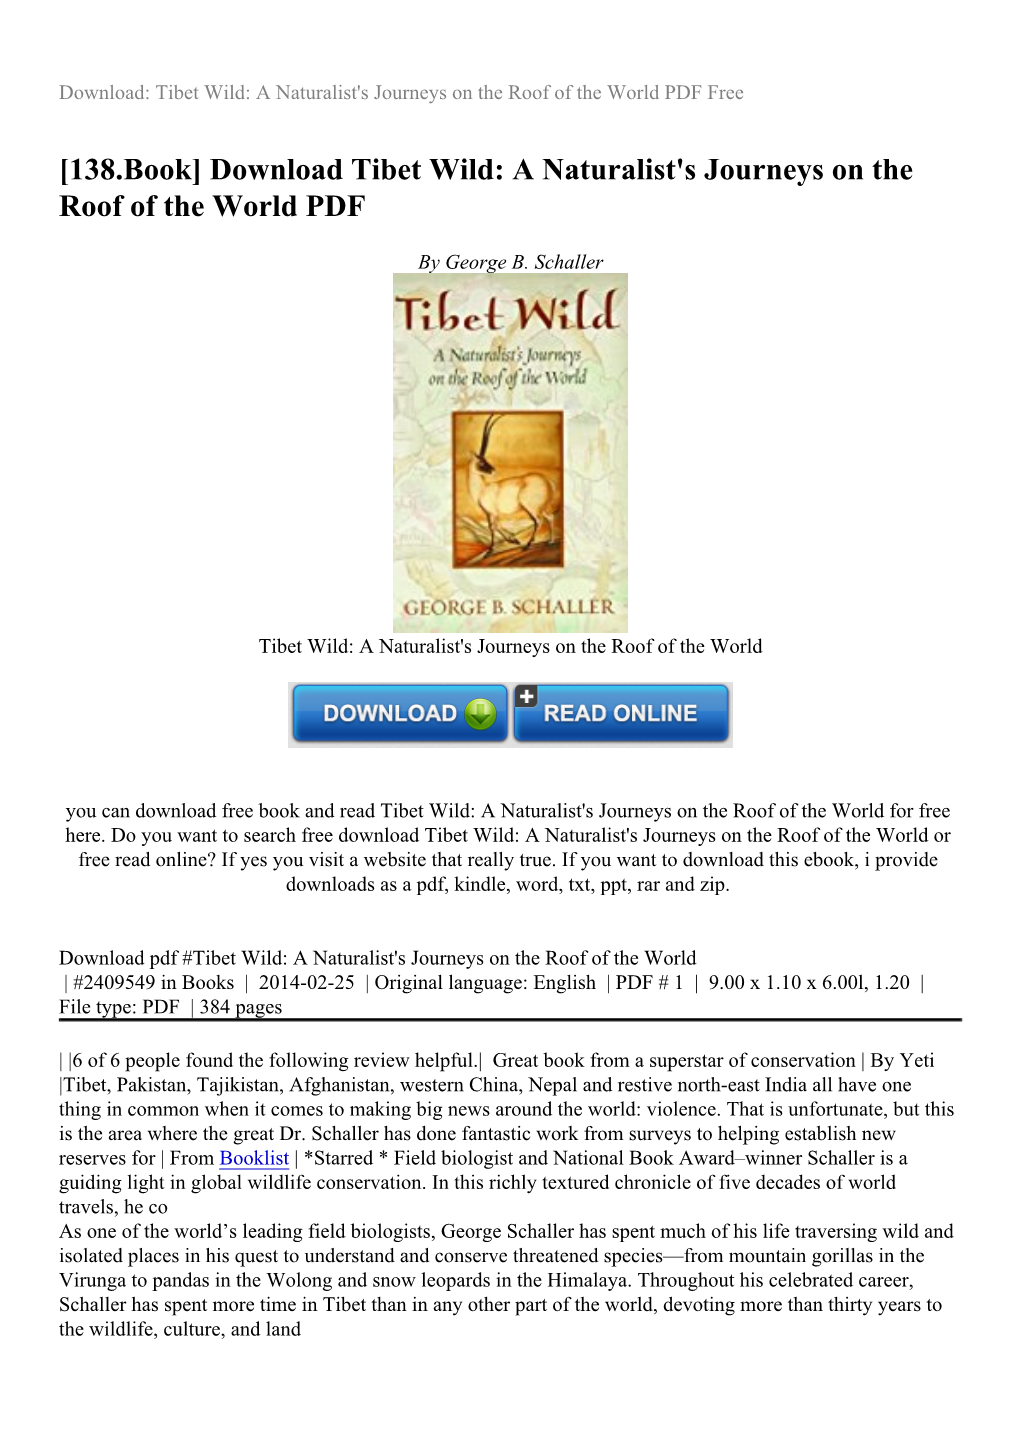 Download Tibet Wild: a Naturalist's Journeys on the Roof of the World PDF